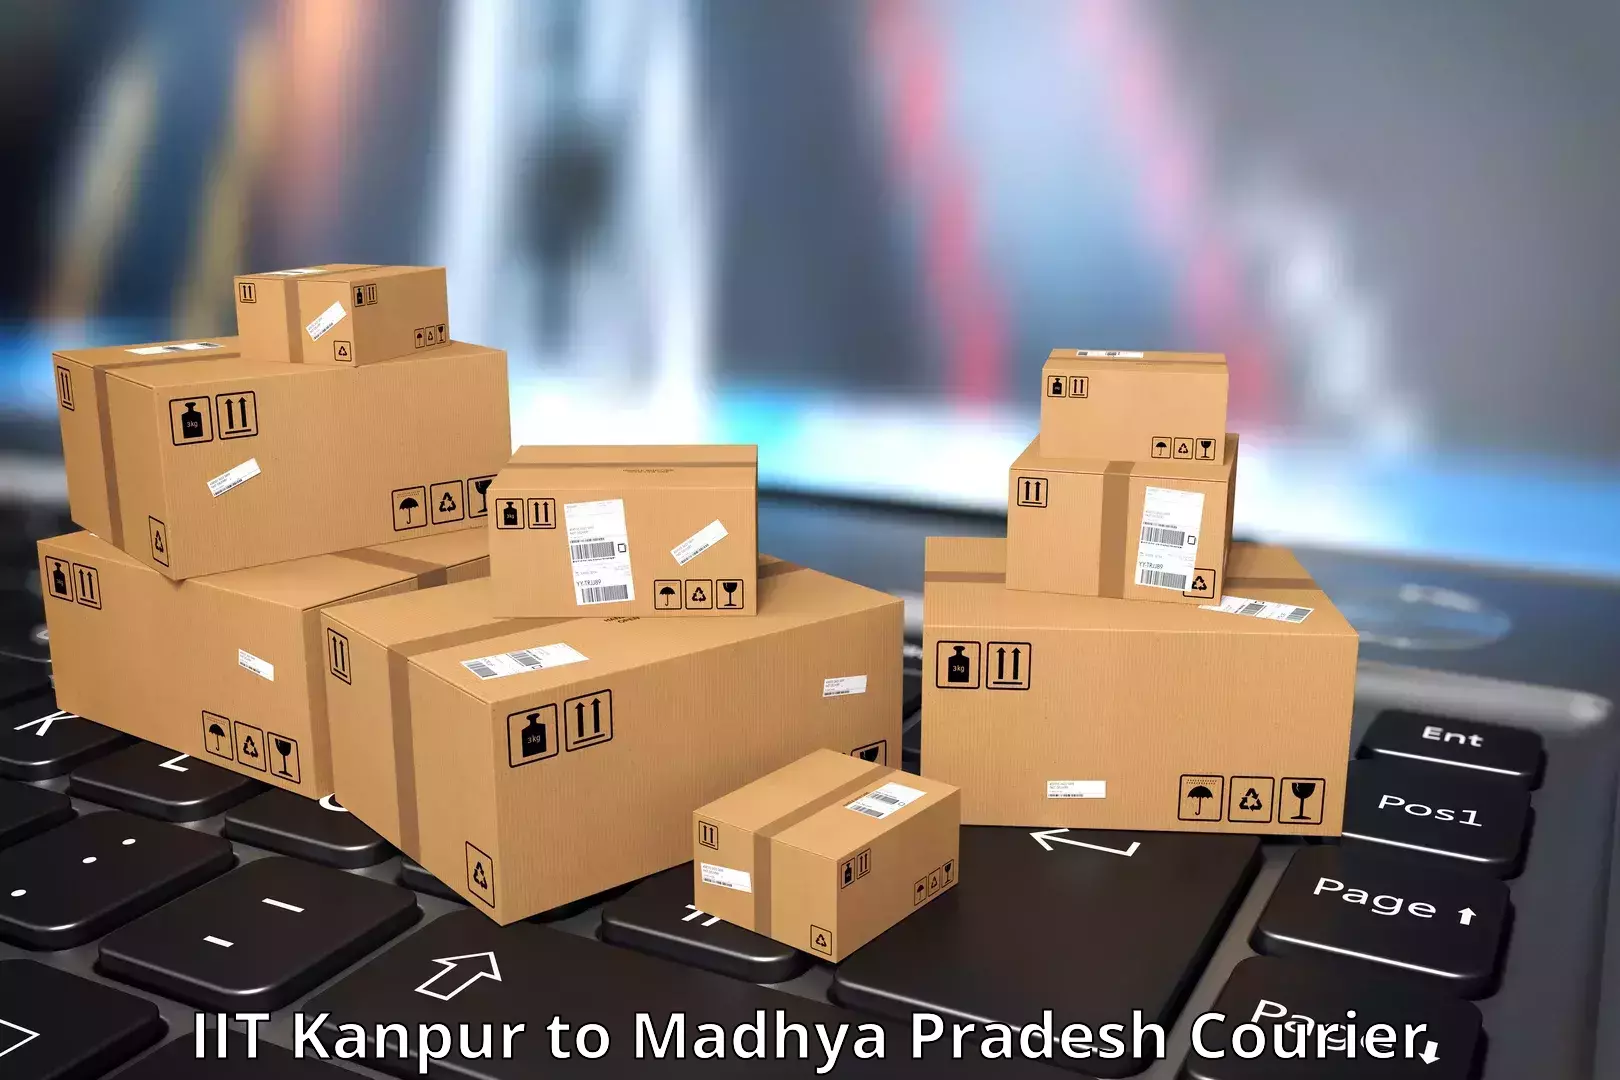 Full-service courier options IIT Kanpur to Bhind